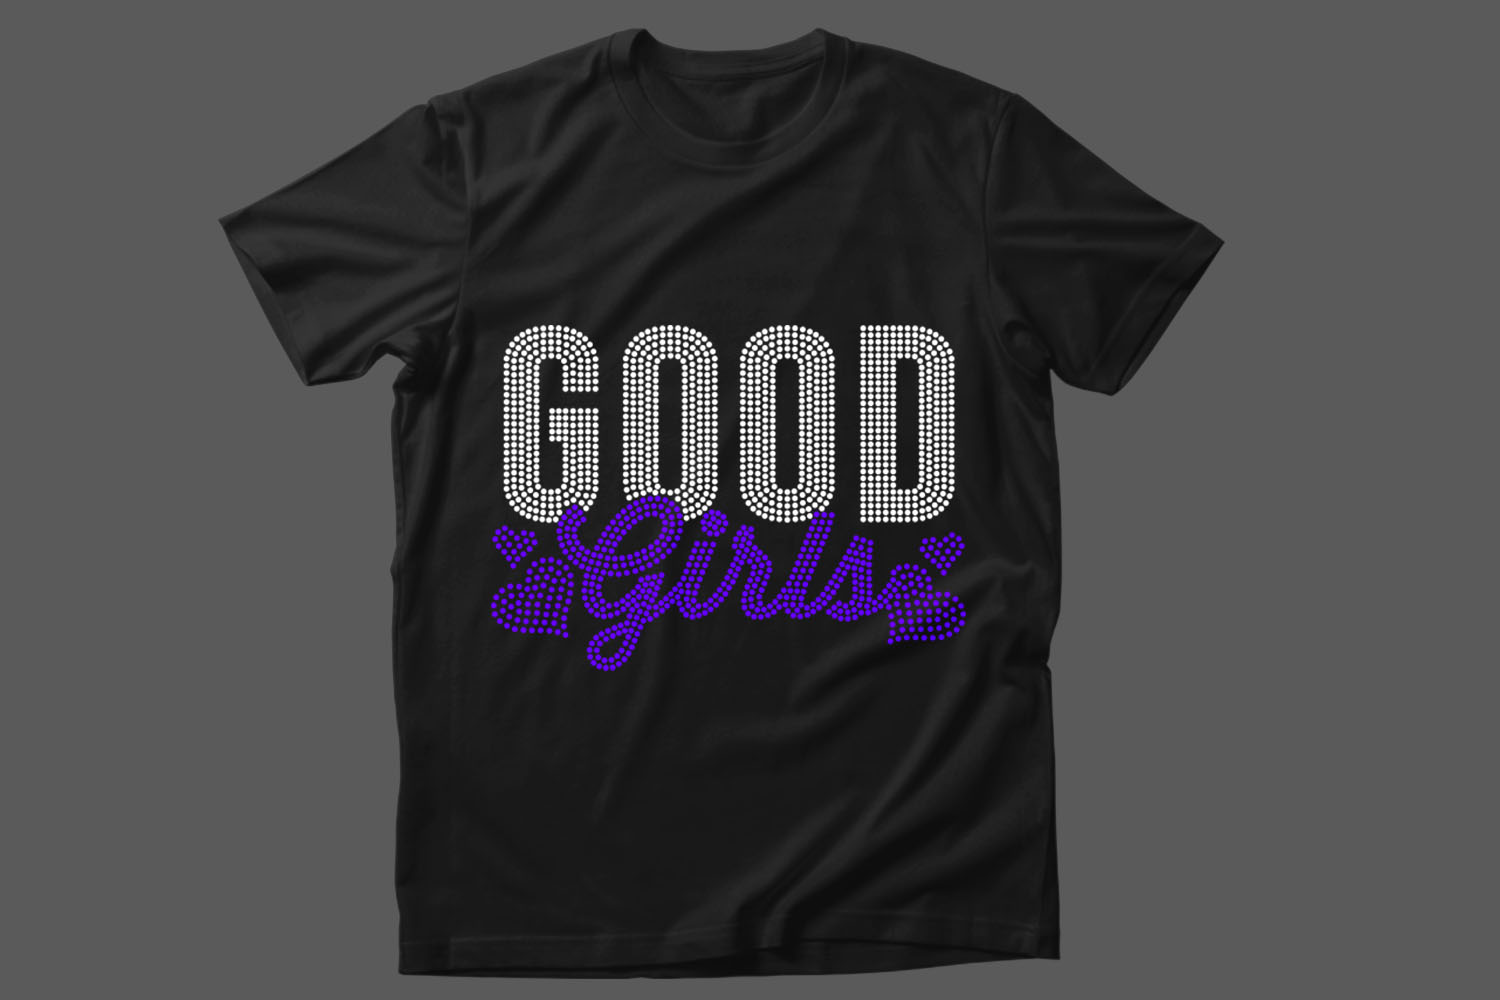 Image of a black t-shirt with a gorgeous Good Girls slogan